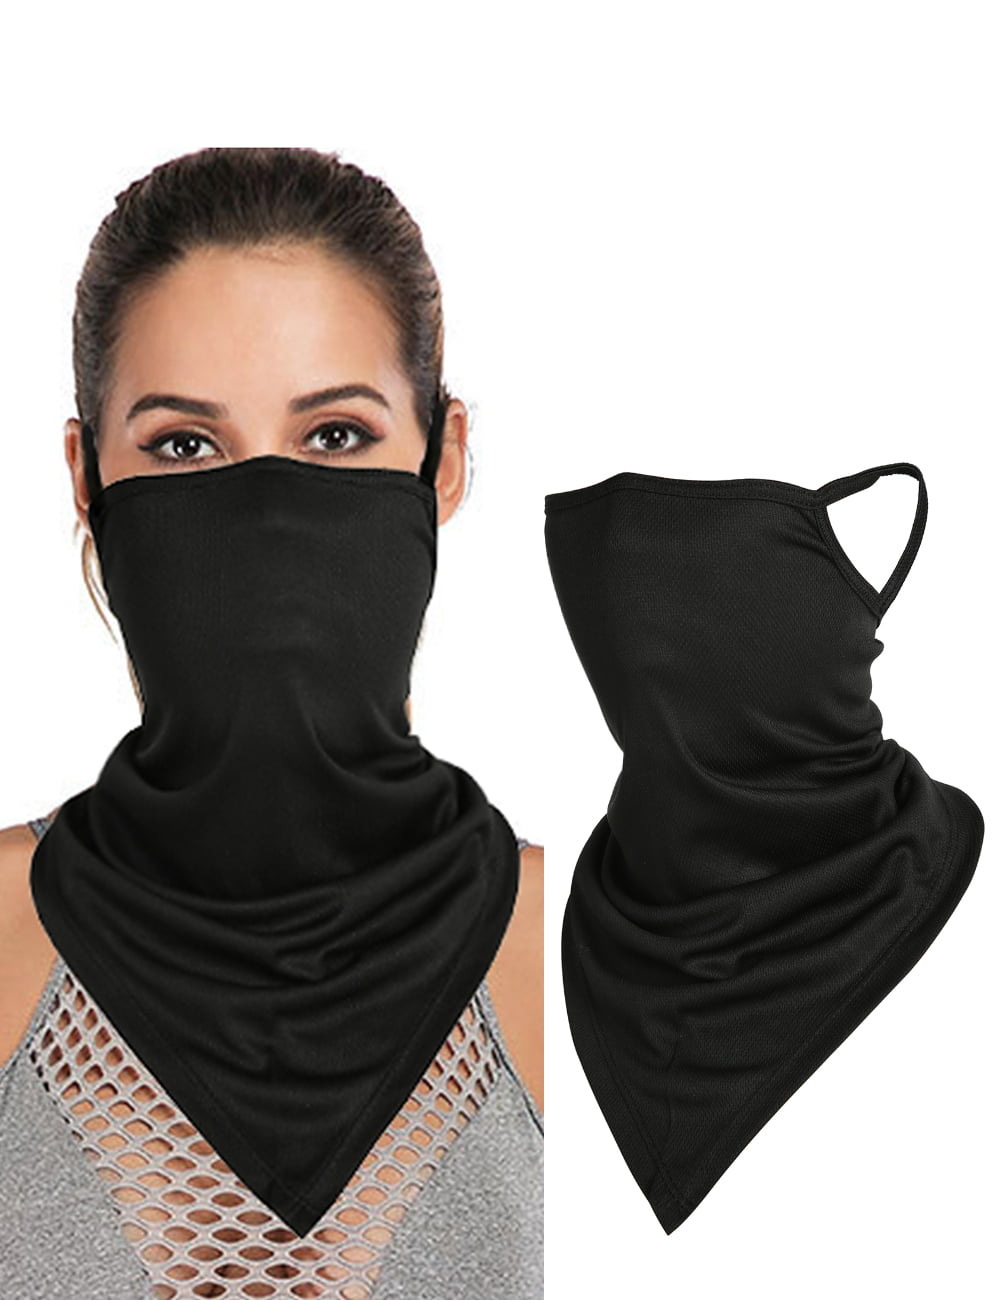 Details about   2PCS Bandana Face Mask Neck Gaiter Sun Shield Scarf Neckerchief with Loops Ear 